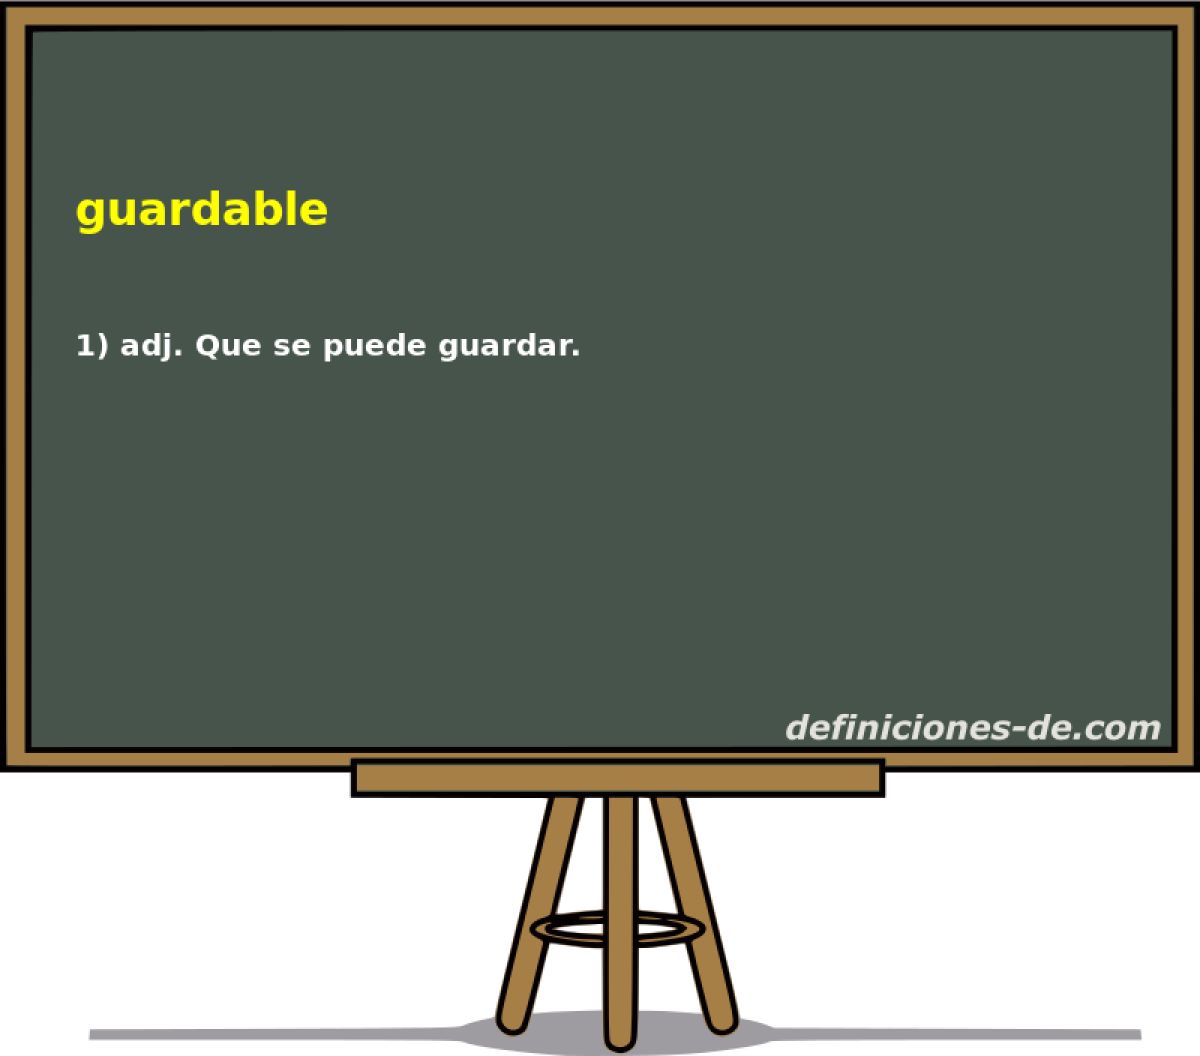 guardable 